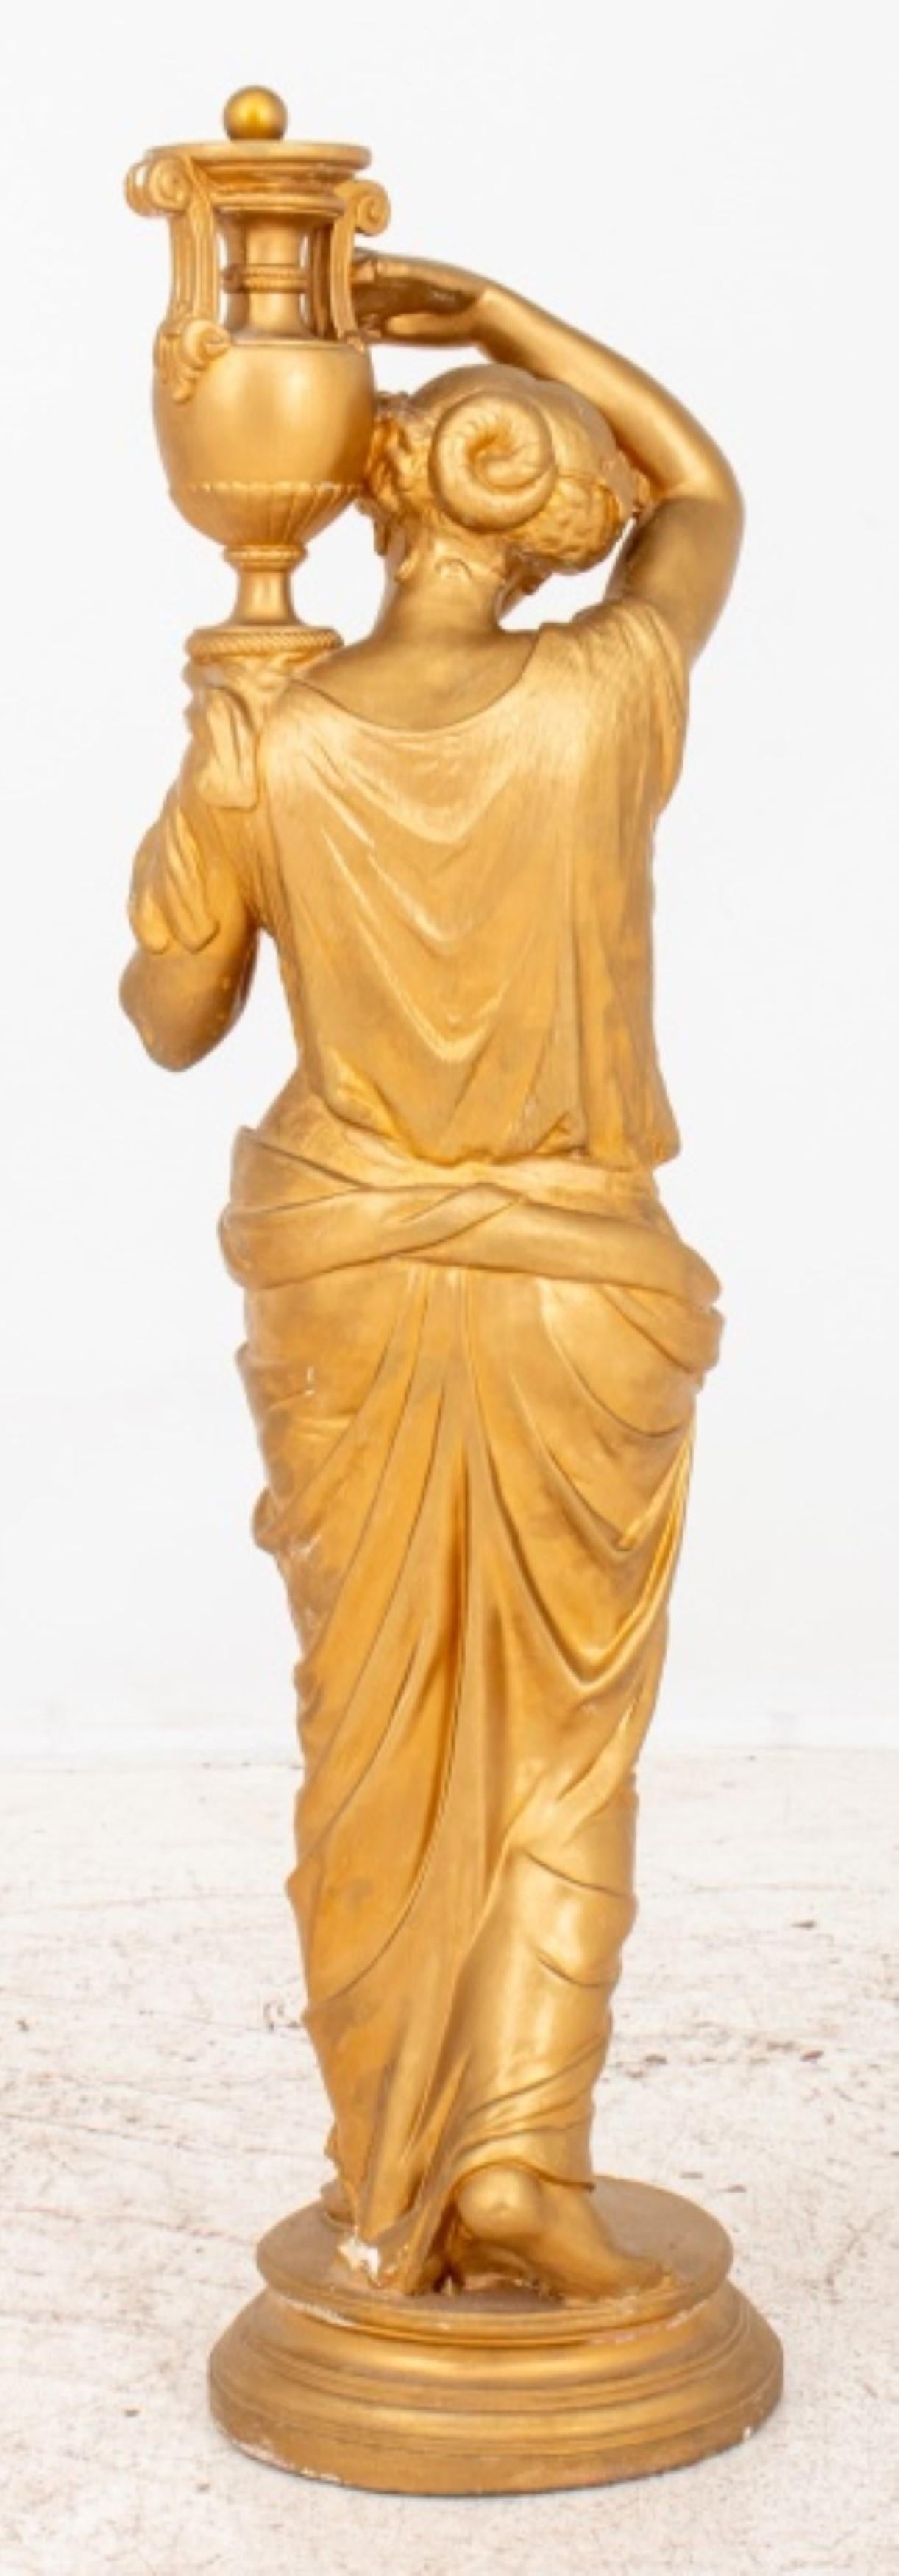 Gilded Plaster Statue, Possibly Hebe For Sale 1